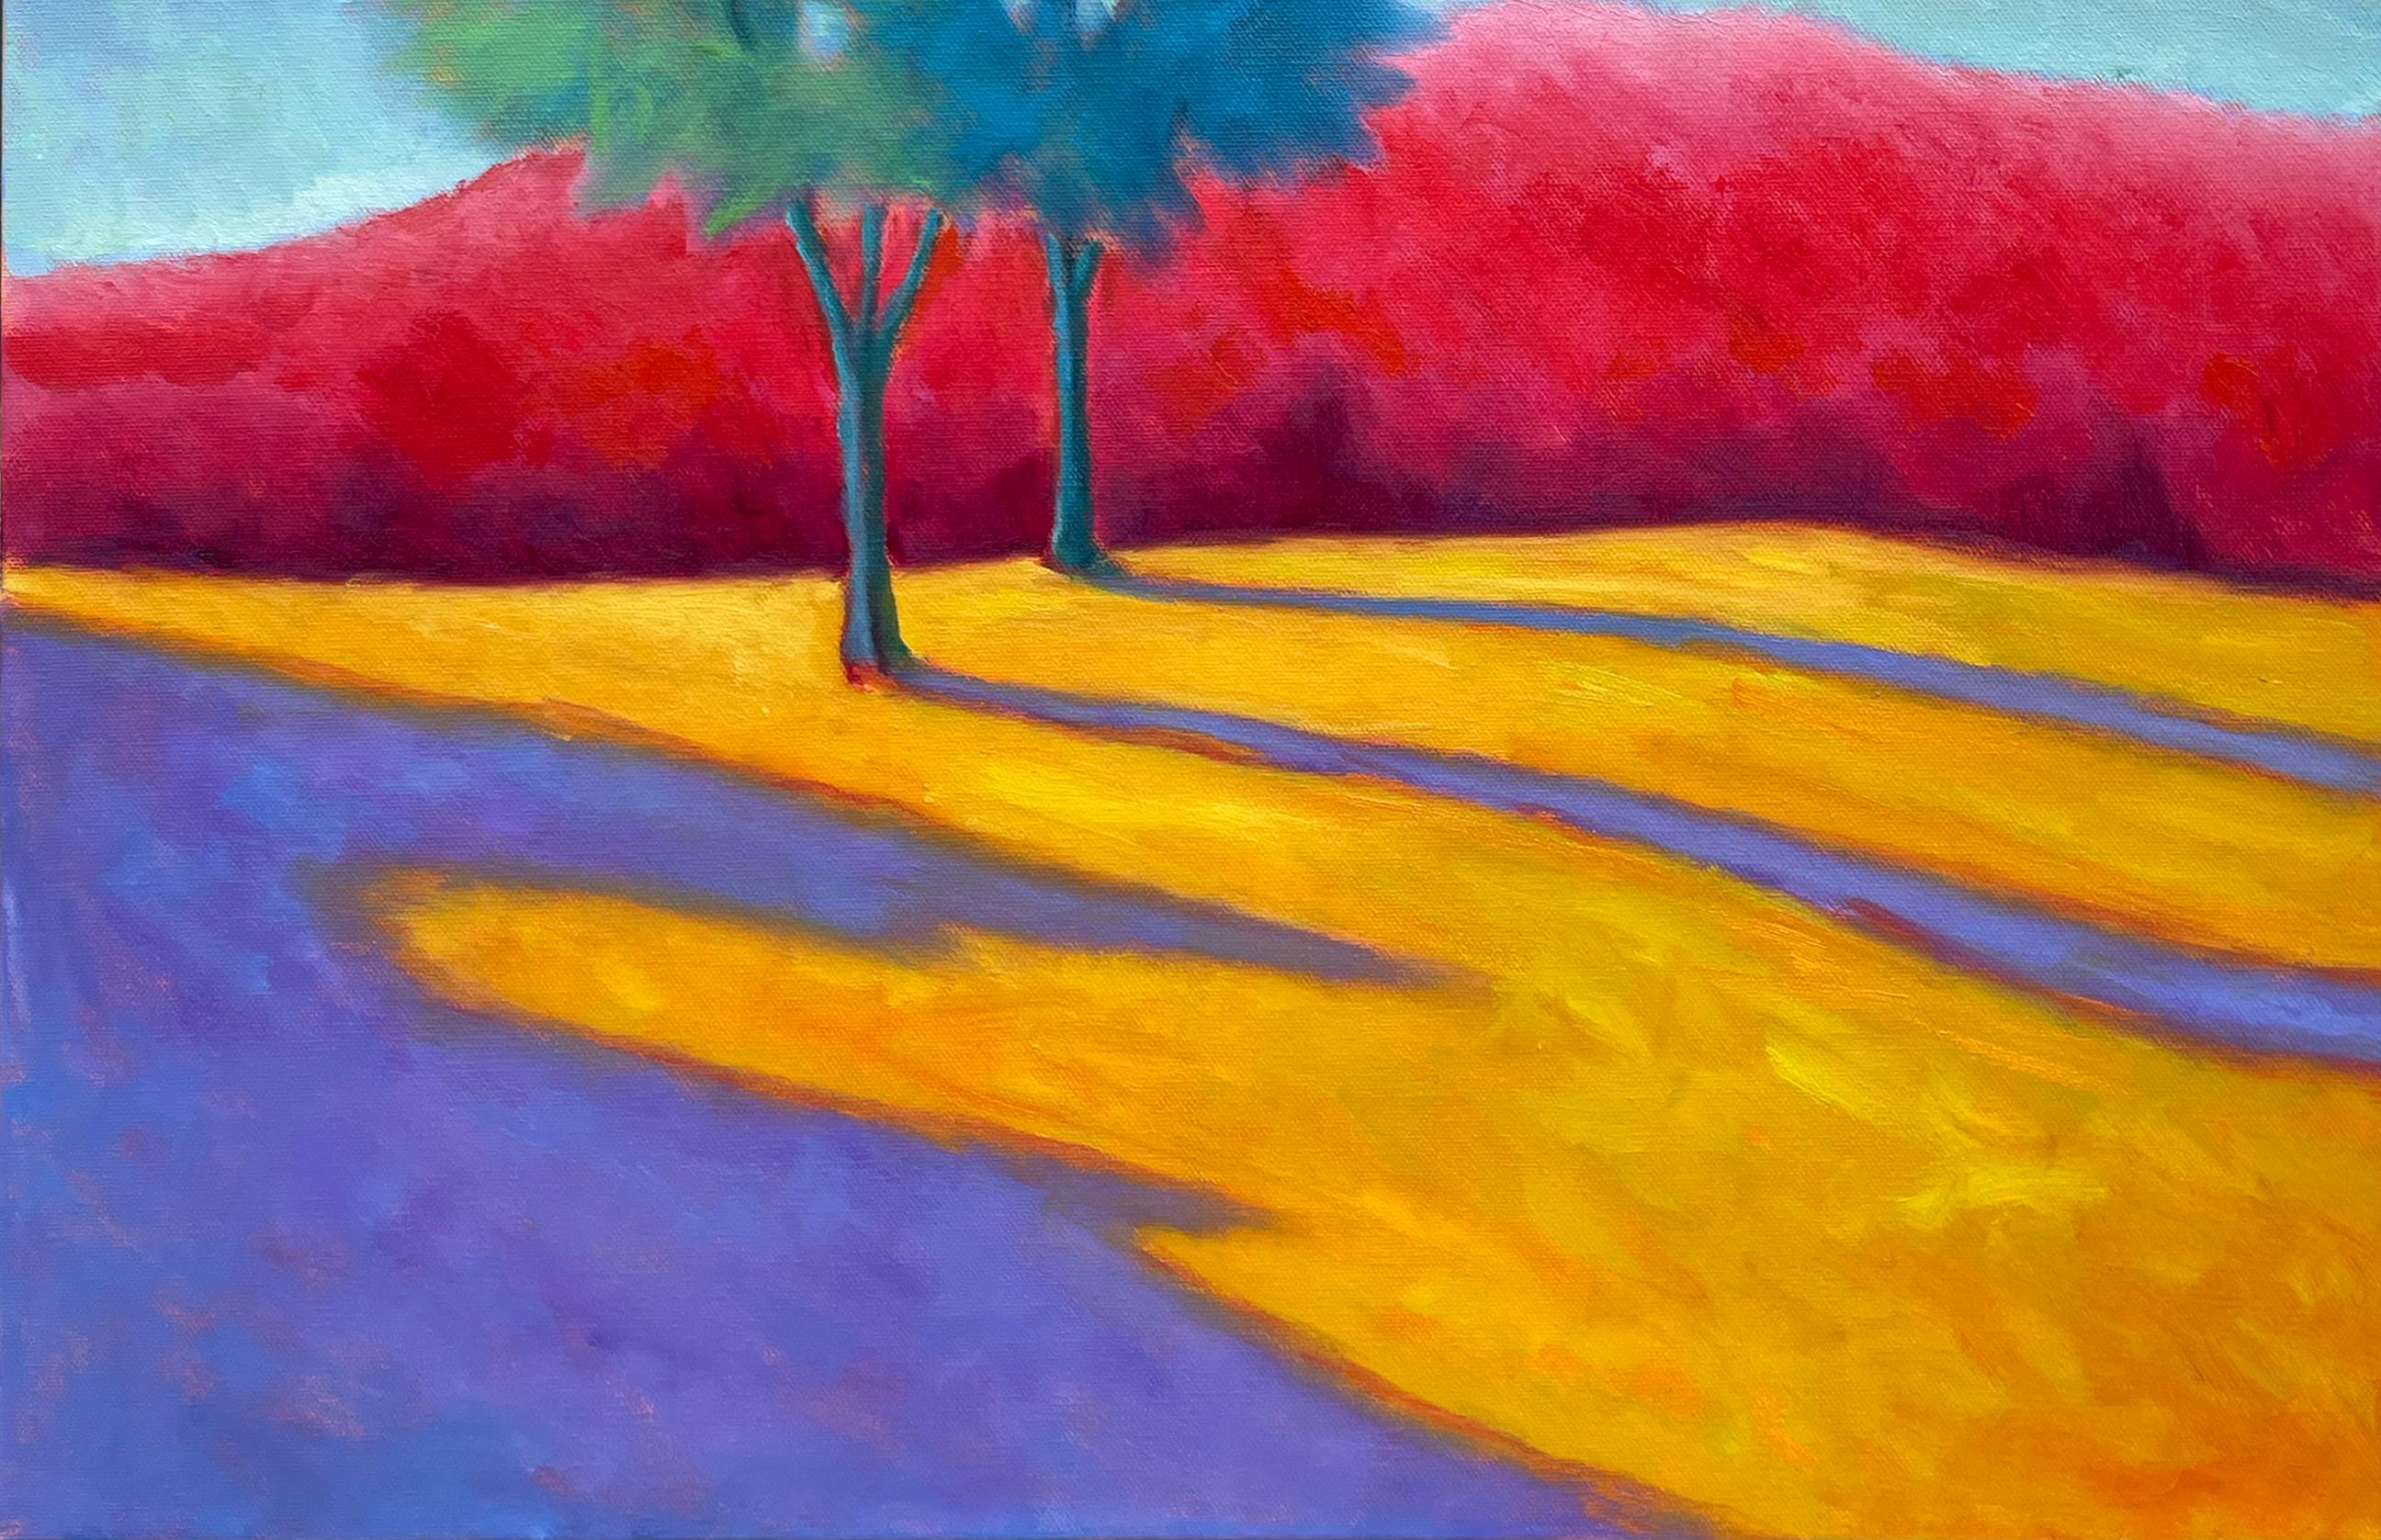 Pacific  is a framed oil on canvas painting  by artist Peter Batchelder.   It is 30